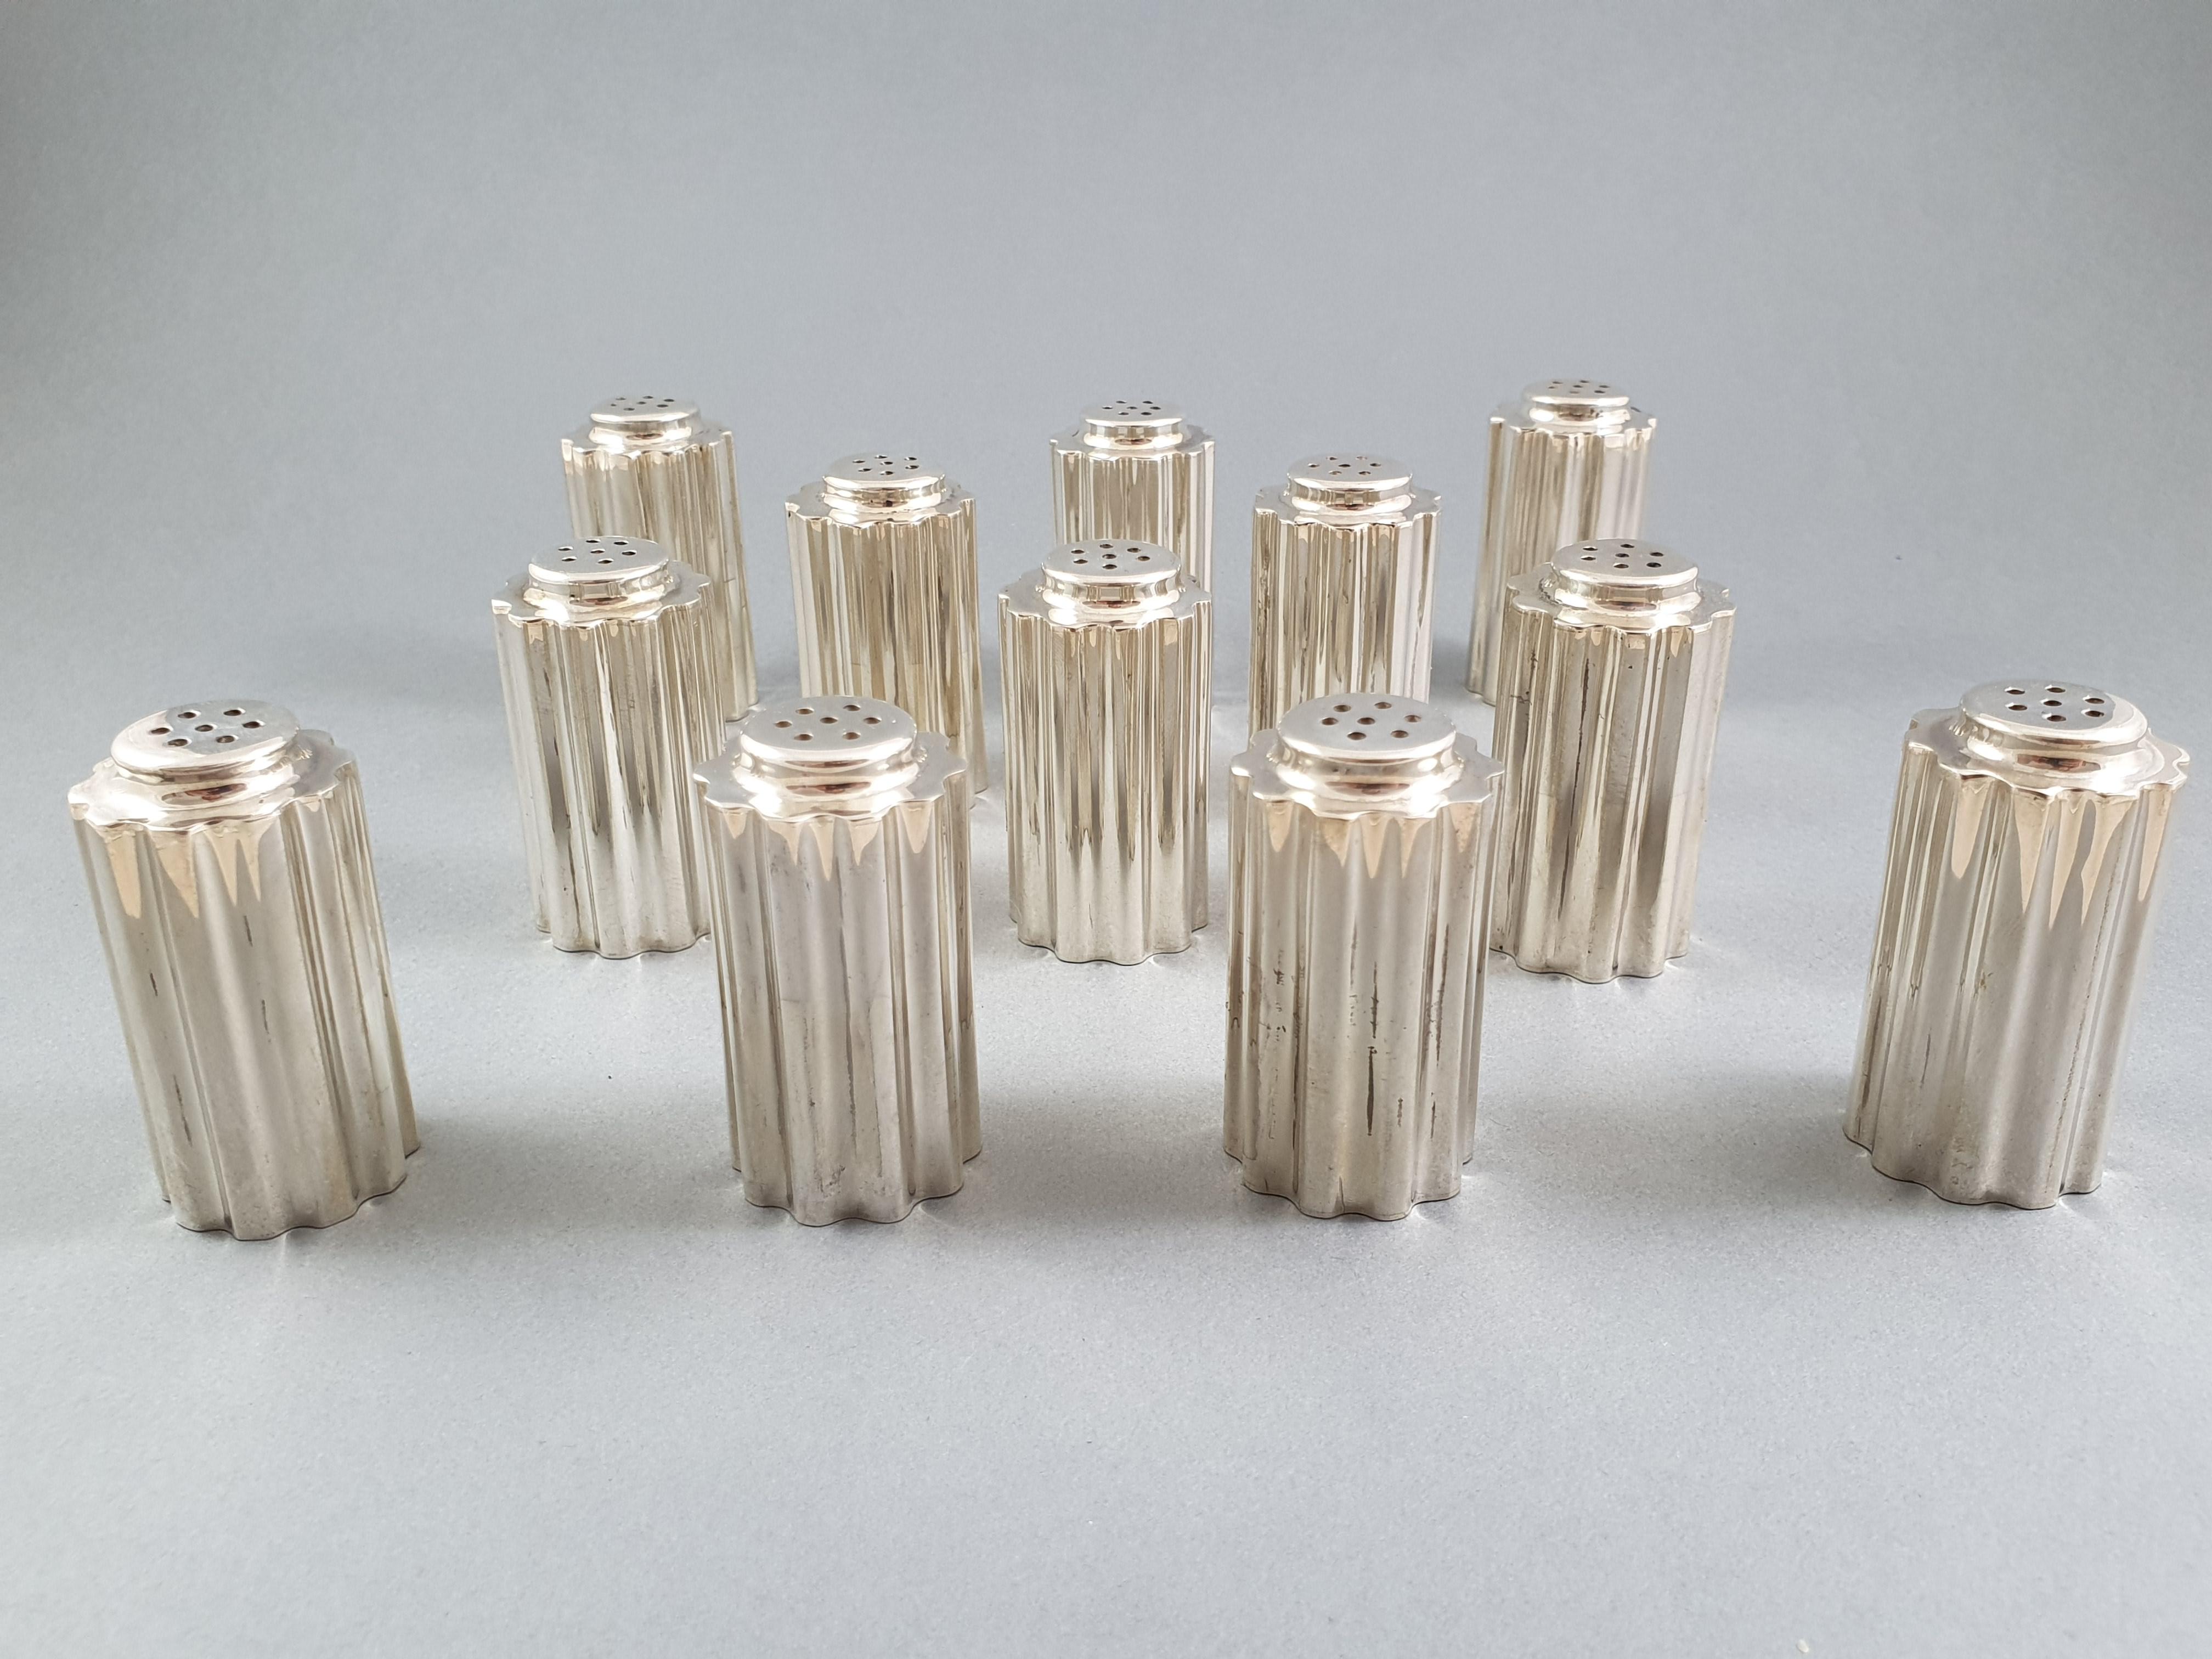 Beautiful series of 12 salt shakers in sterling silver 

1970's italian work 

925 silver hallmark 
Height: 4.9 cm - 1.9 inches
Diameter: 2.6 cm - 1 inches
Weight: 423 grams

Great condition.